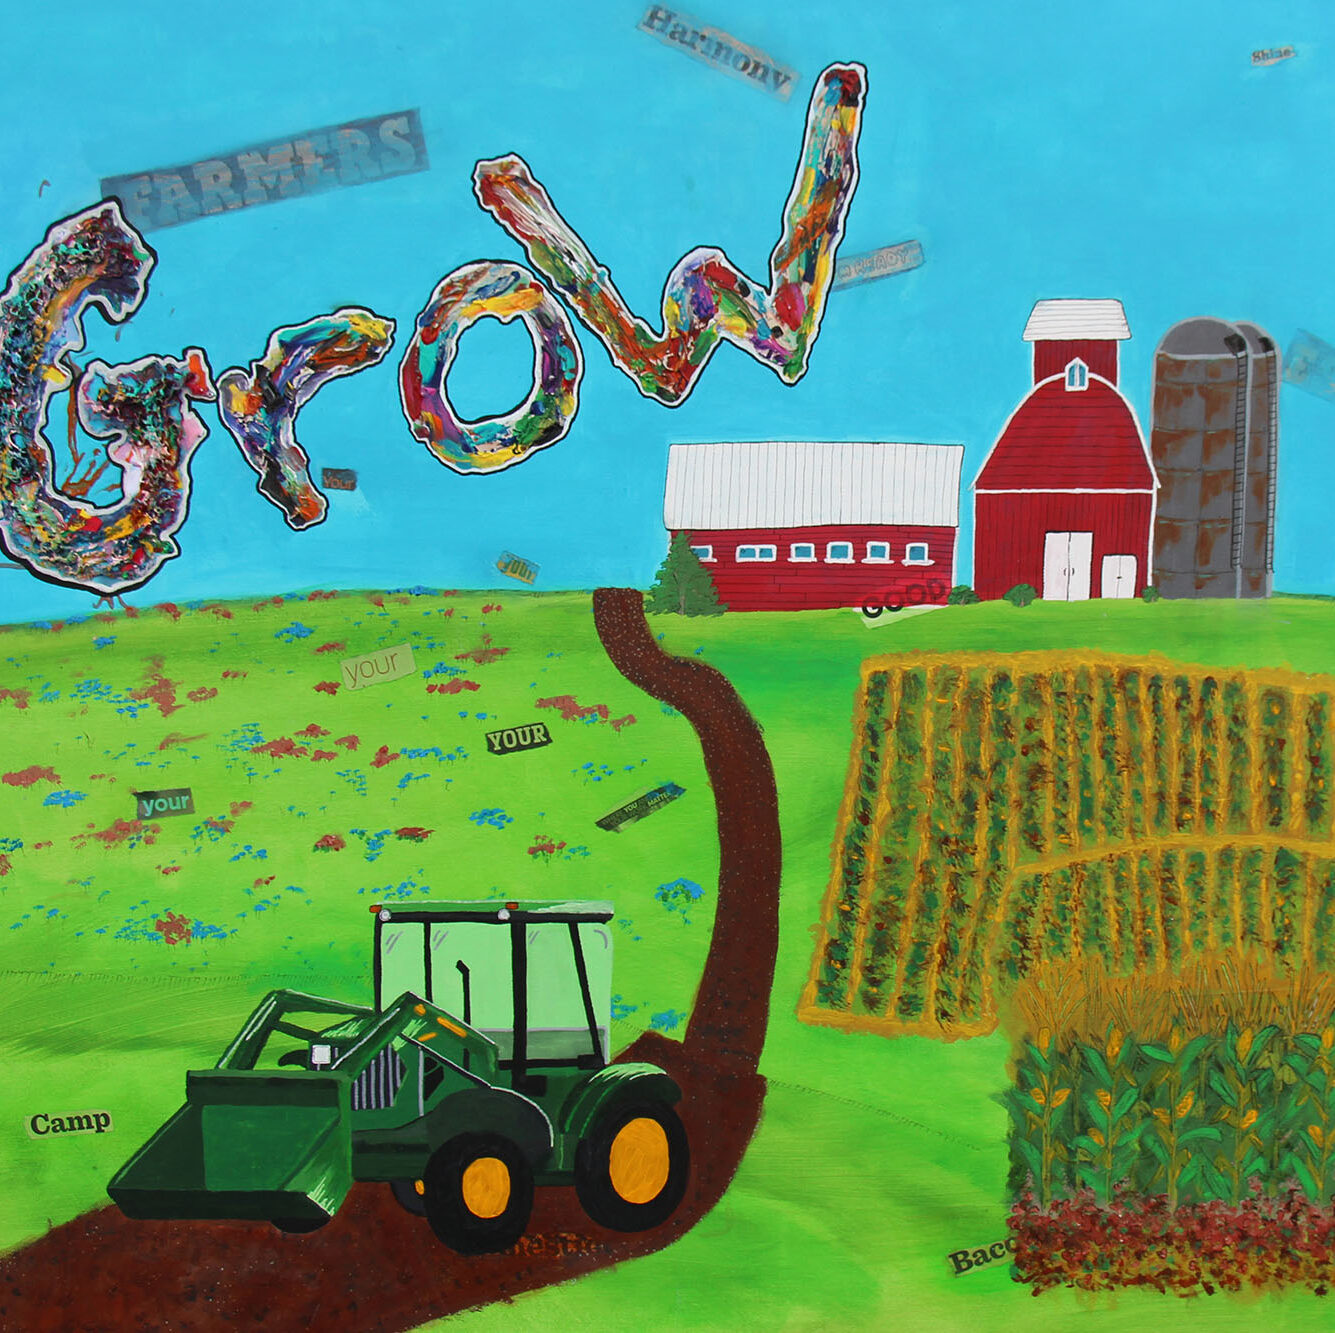 Artwork created by a former program participant in CRCF. Depicts a farm with a barn, tractor, field, and the word ‘Grow’.